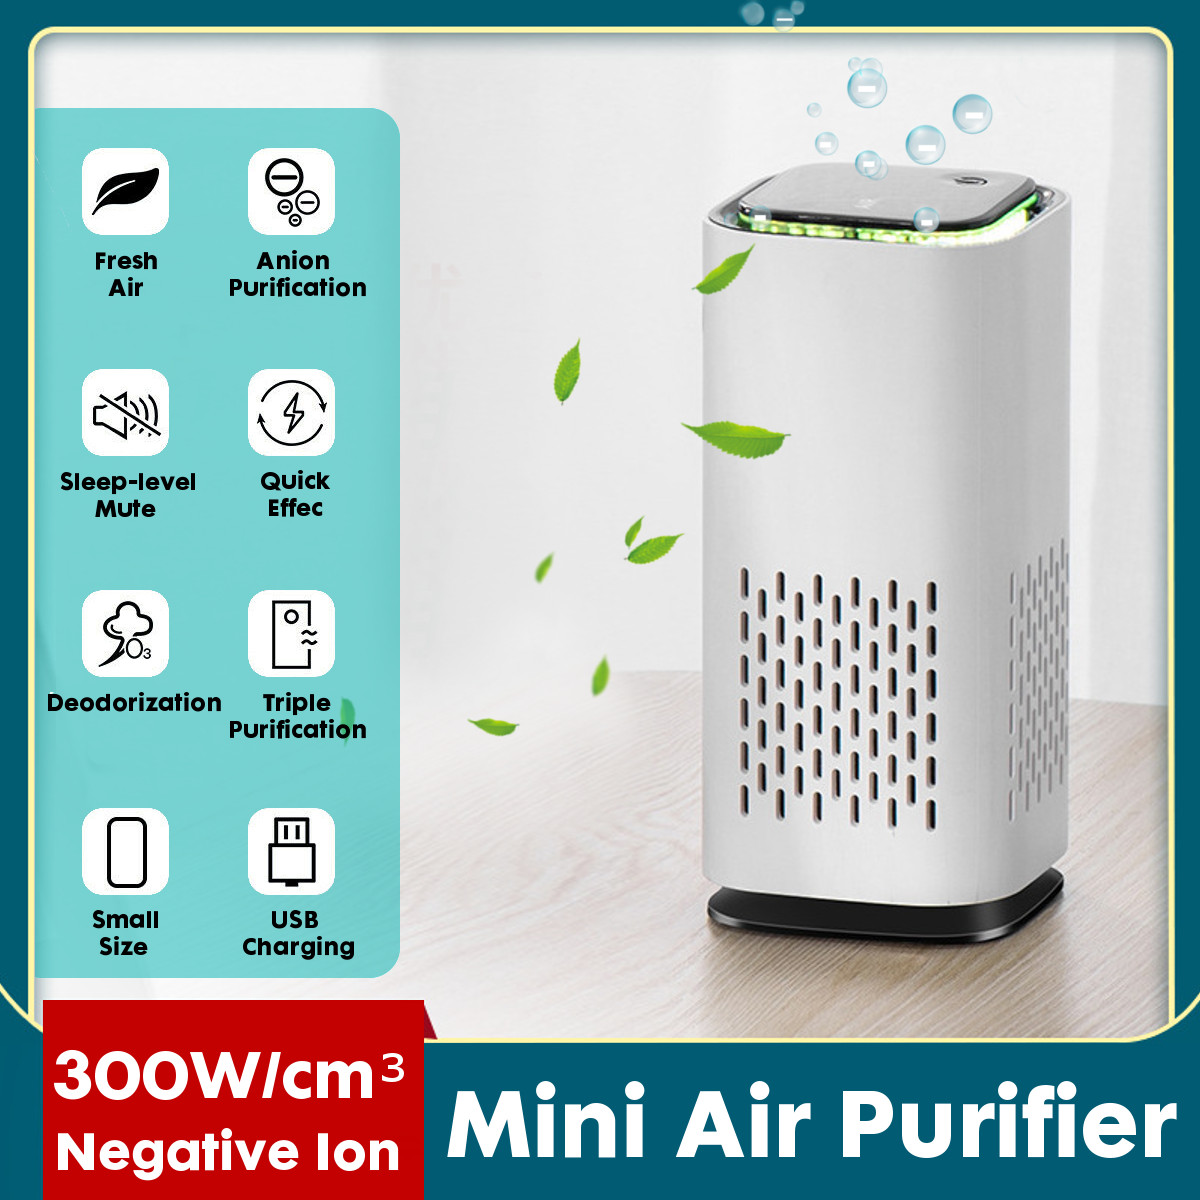 Bakeey-Mini-Air-Purifier-With-7-Color-Light-USB-Smart-Home-Car-Fresh-Oxygen-Ionizer-Smoke-Cleaner-1854025-1